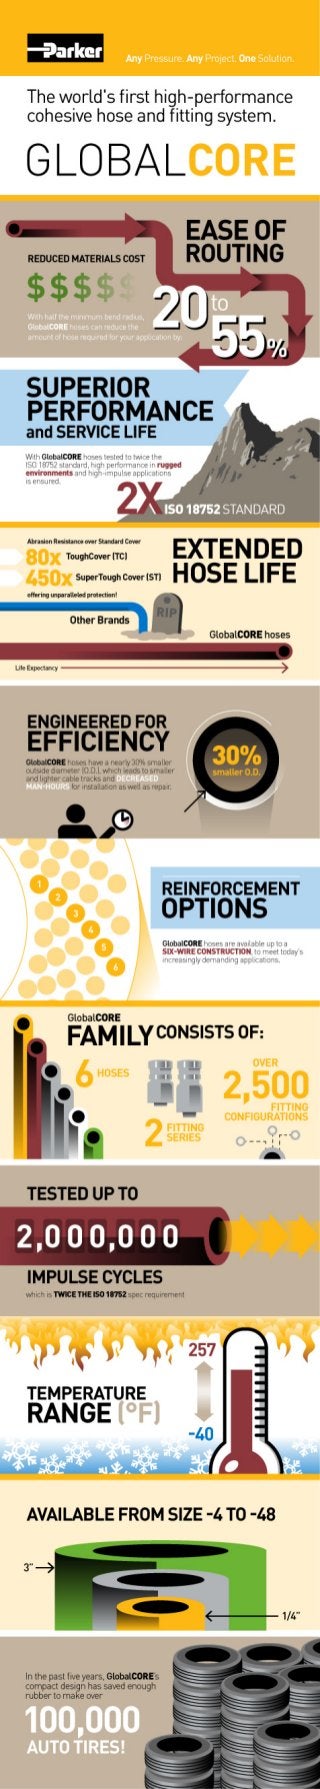 GlobalCore: Any Pressure. Any Project. One Solution - 6 Hoses #infographic